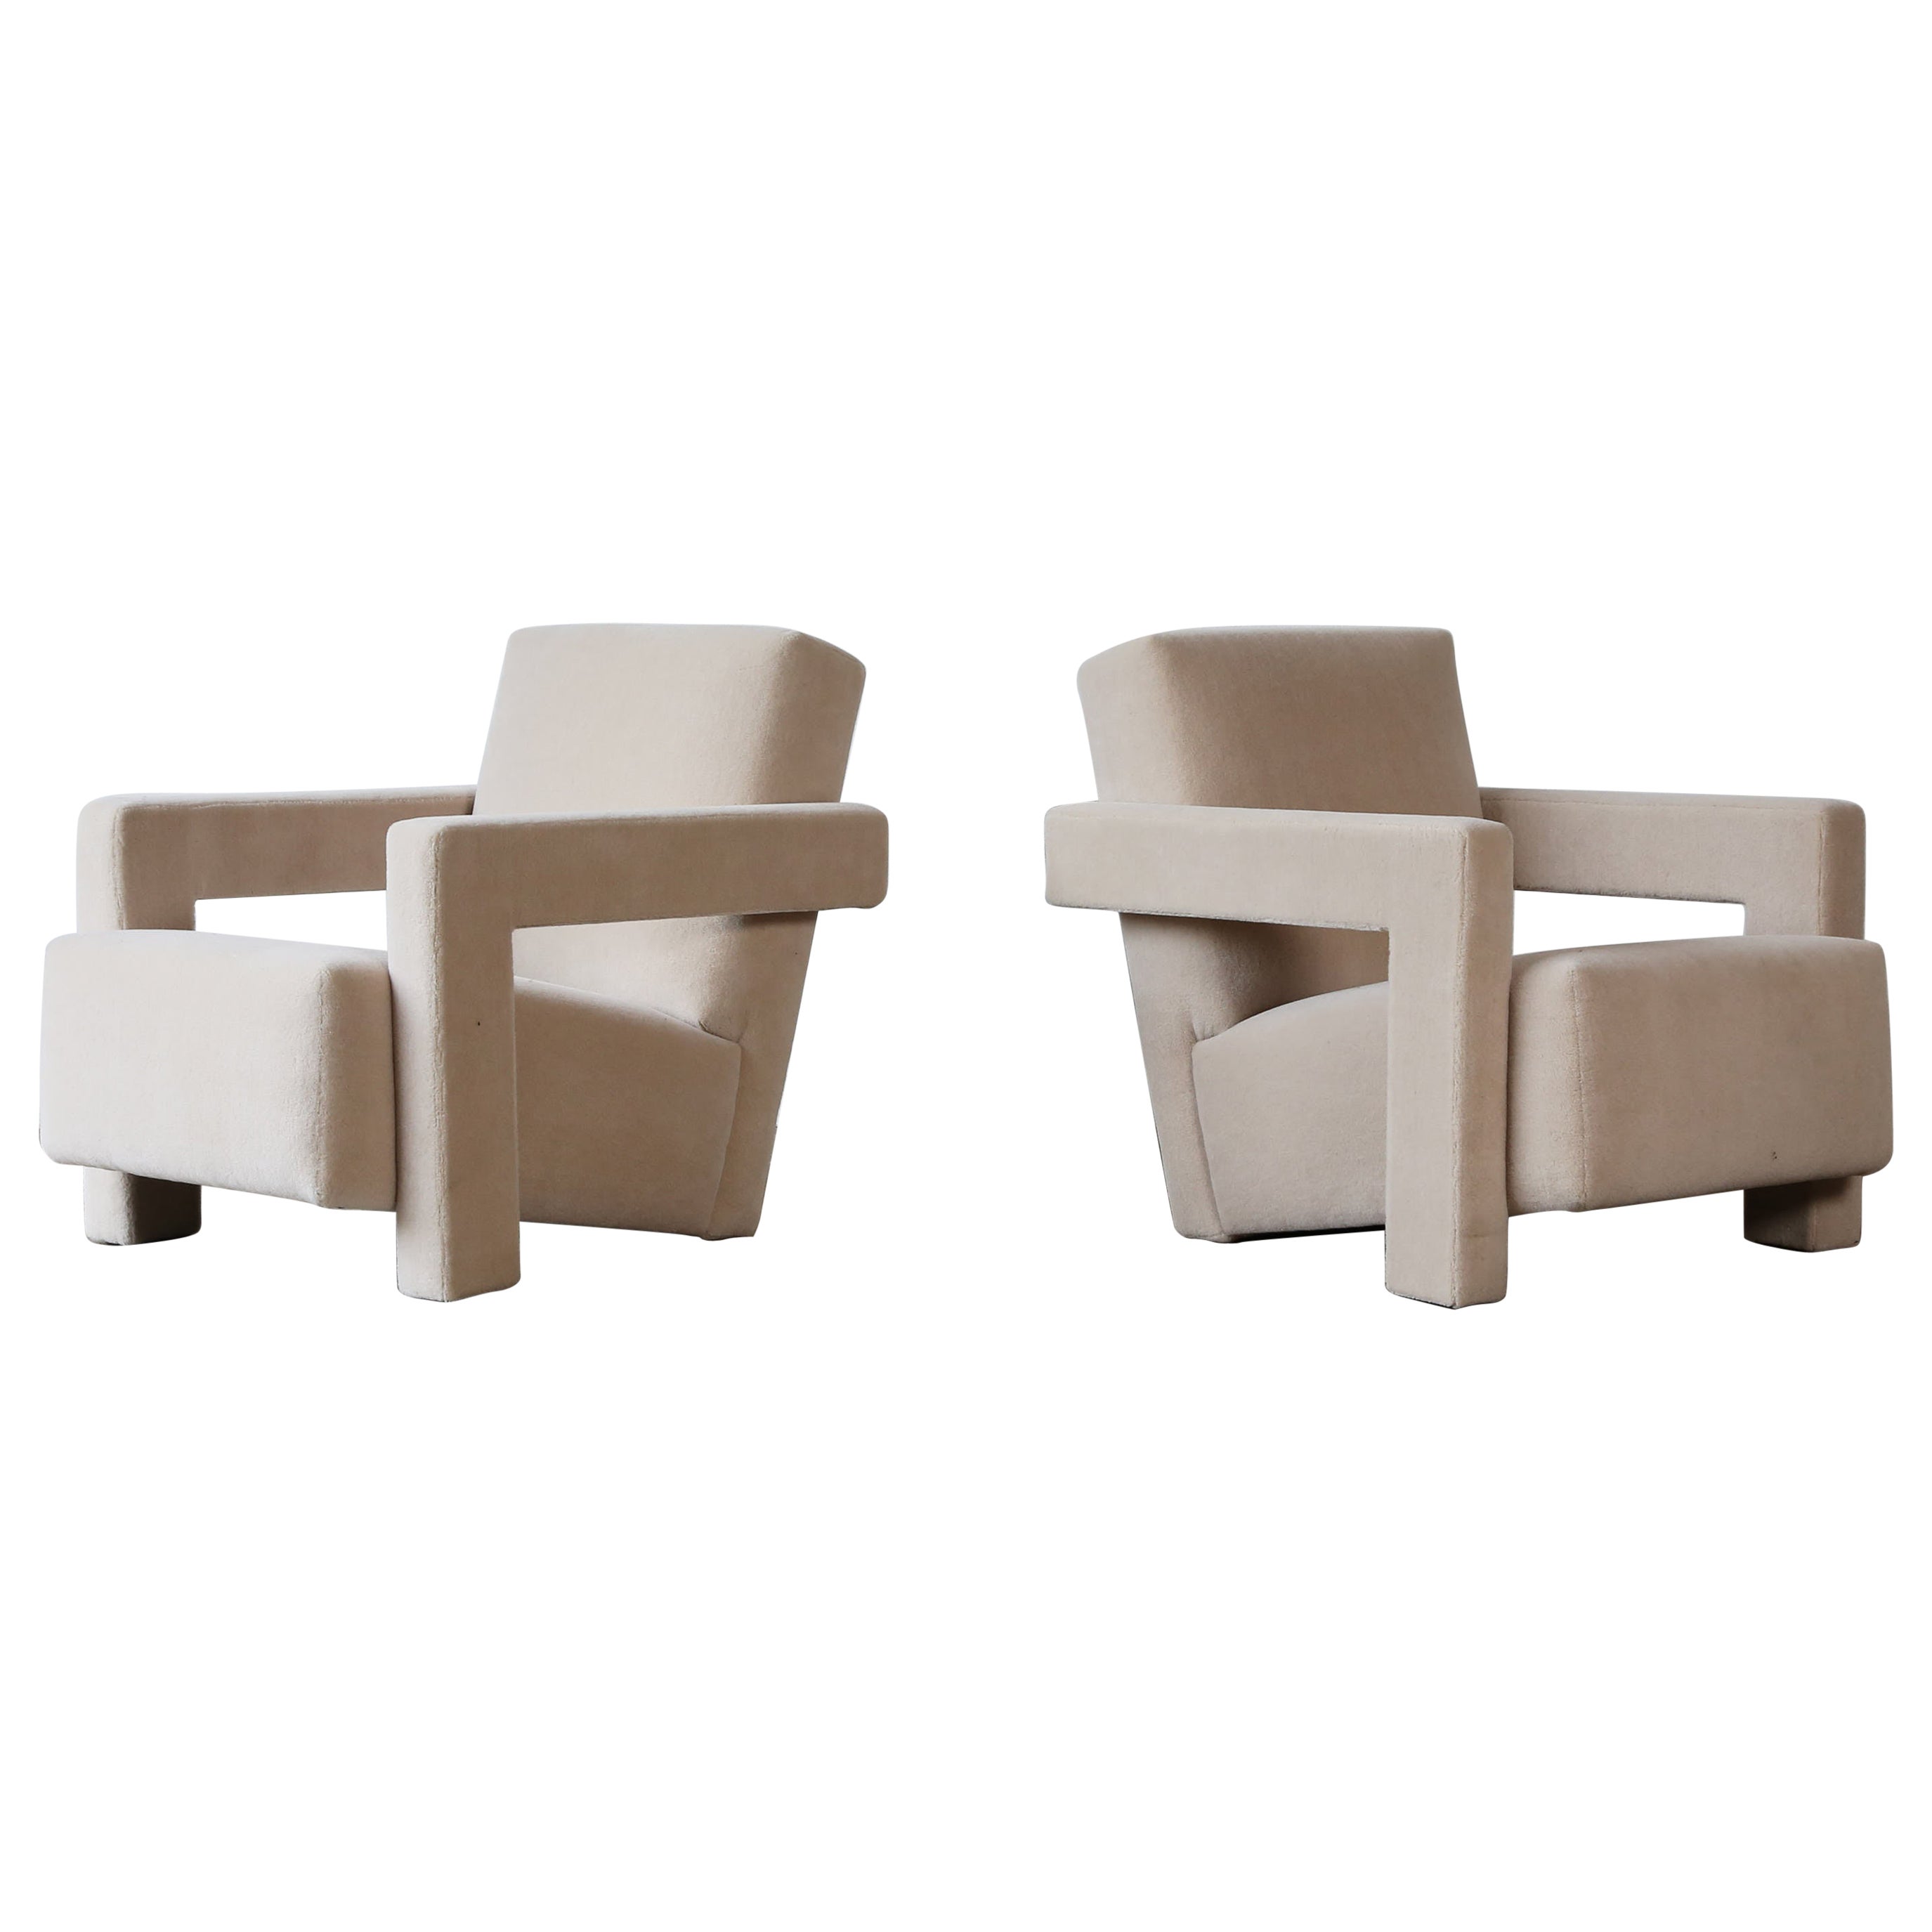 Gerrit Rietveld XL Utrecht Chairs, Cassina, Newly Upholstered in Pure Alpaca For Sale